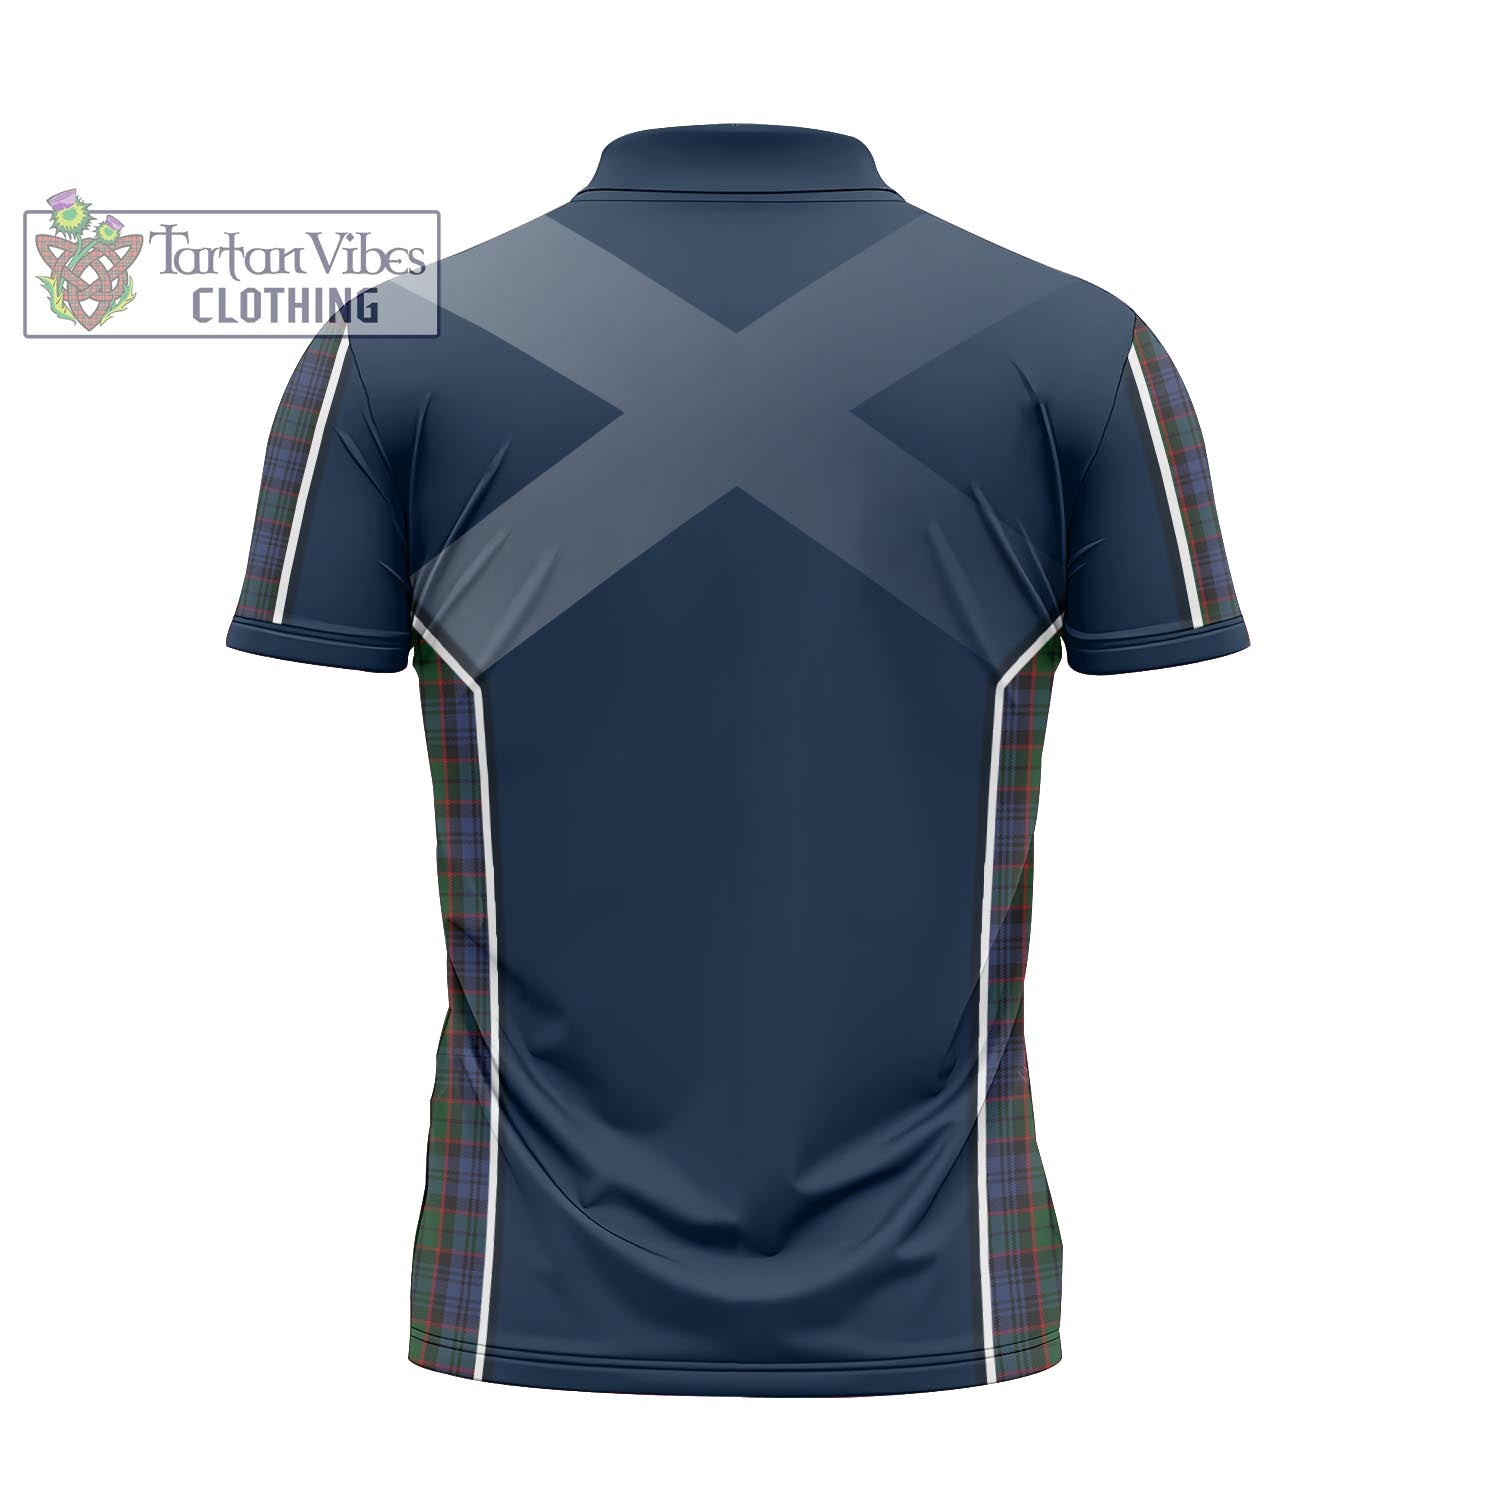 Tartan Vibes Clothing Fletcher Tartan Zipper Polo Shirt with Family Crest and Scottish Thistle Vibes Sport Style